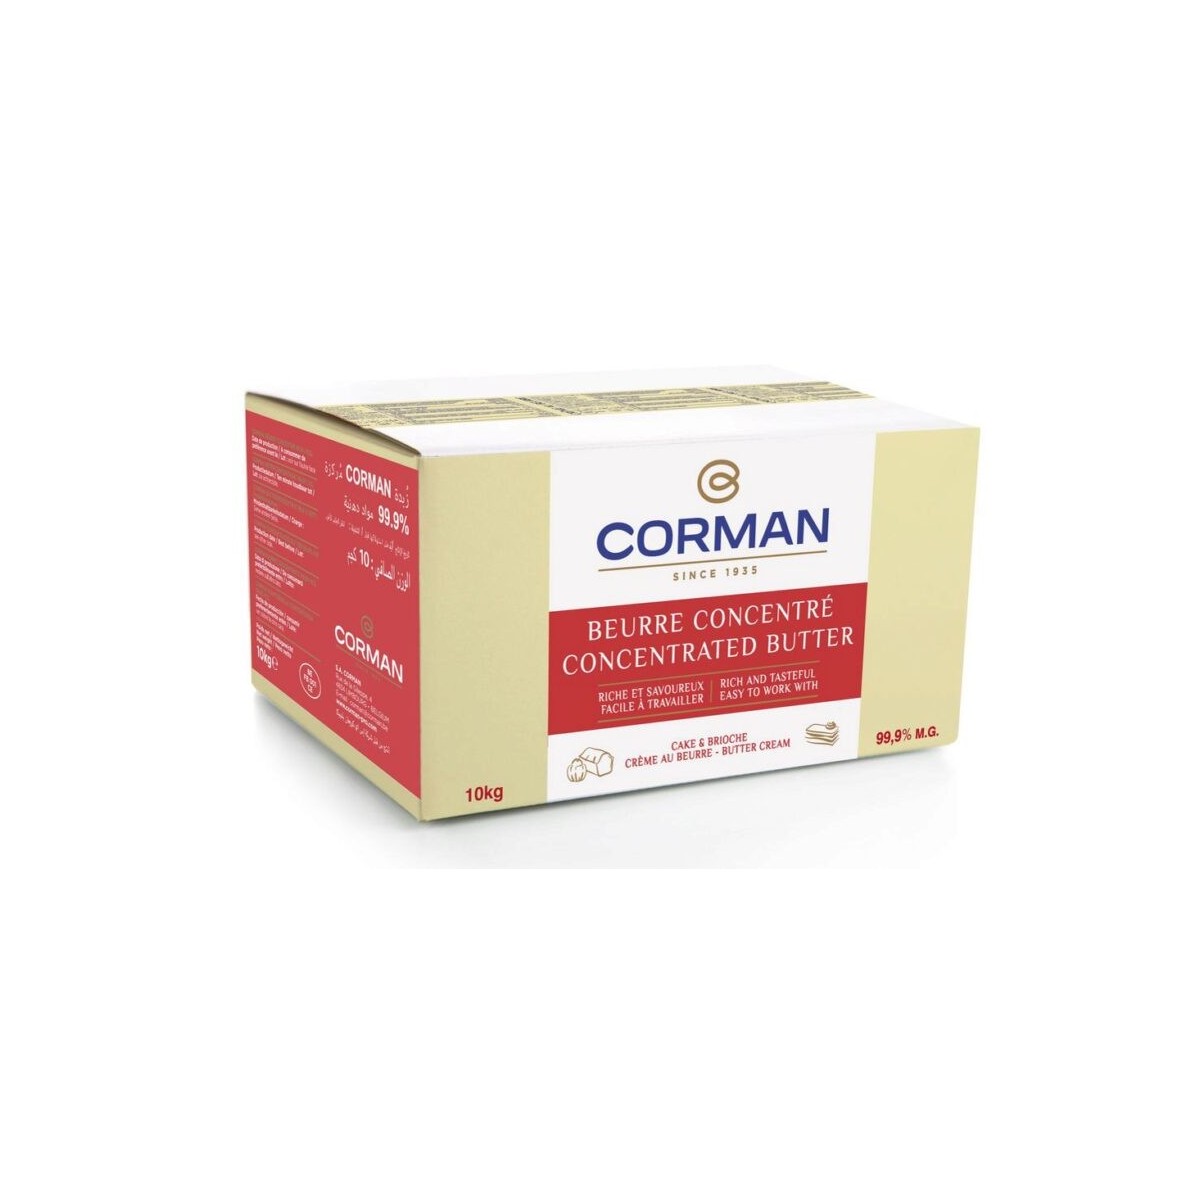 CORMAN BUTTER CONCENTRATED CREAM WITH BUTTER BLOCK 10KG 0029120 / 26851501  KG